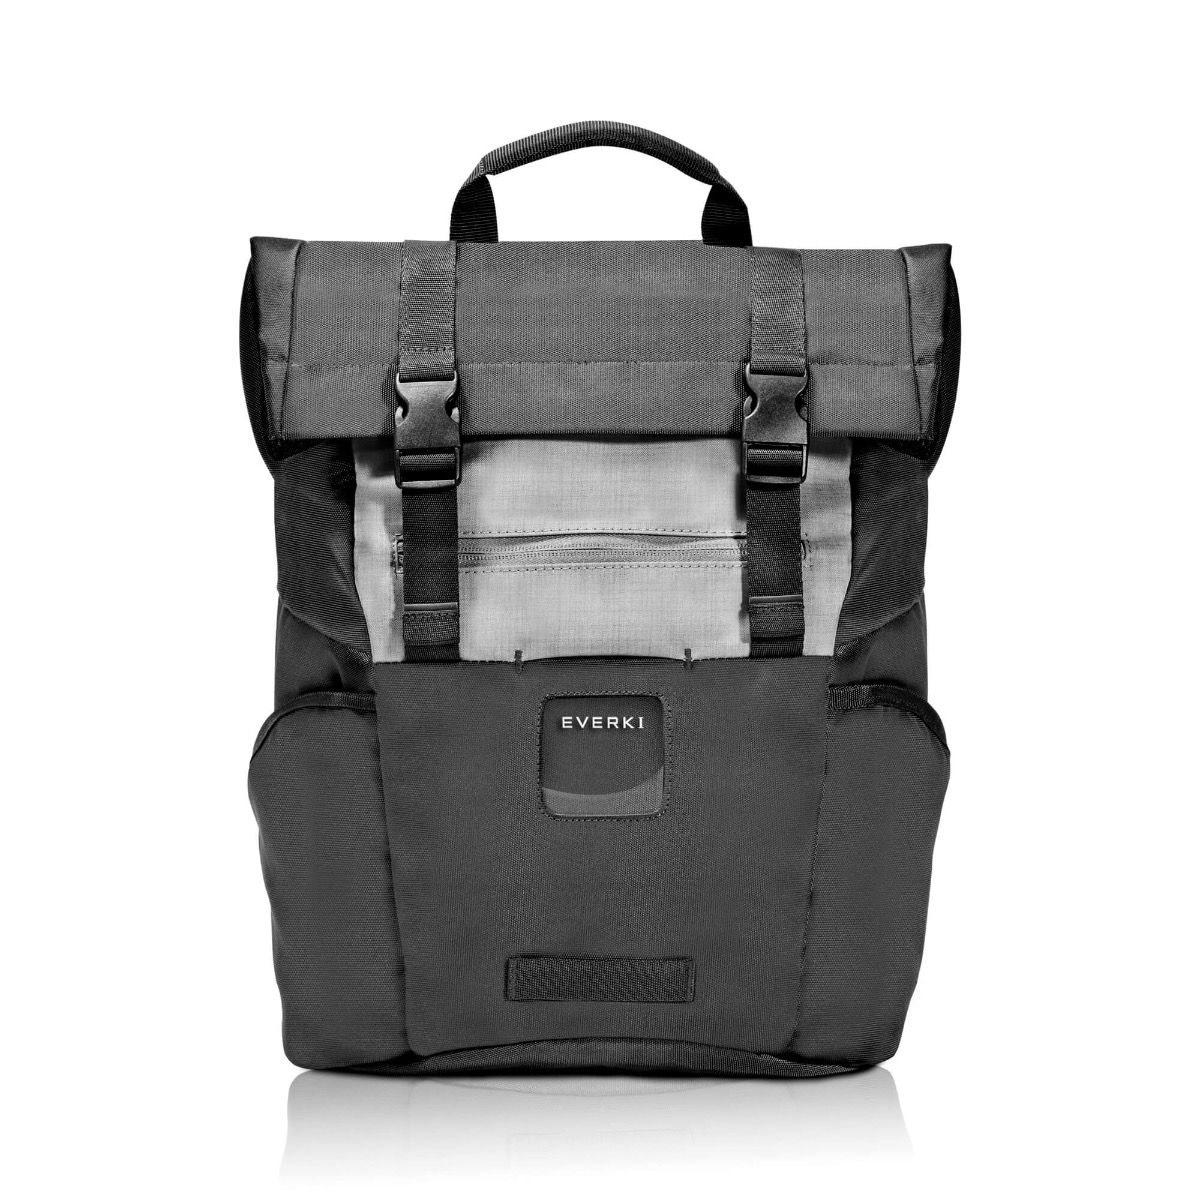 ContemPRO Roll Top Laptop Backpack, up to 15.6-Inch - Black